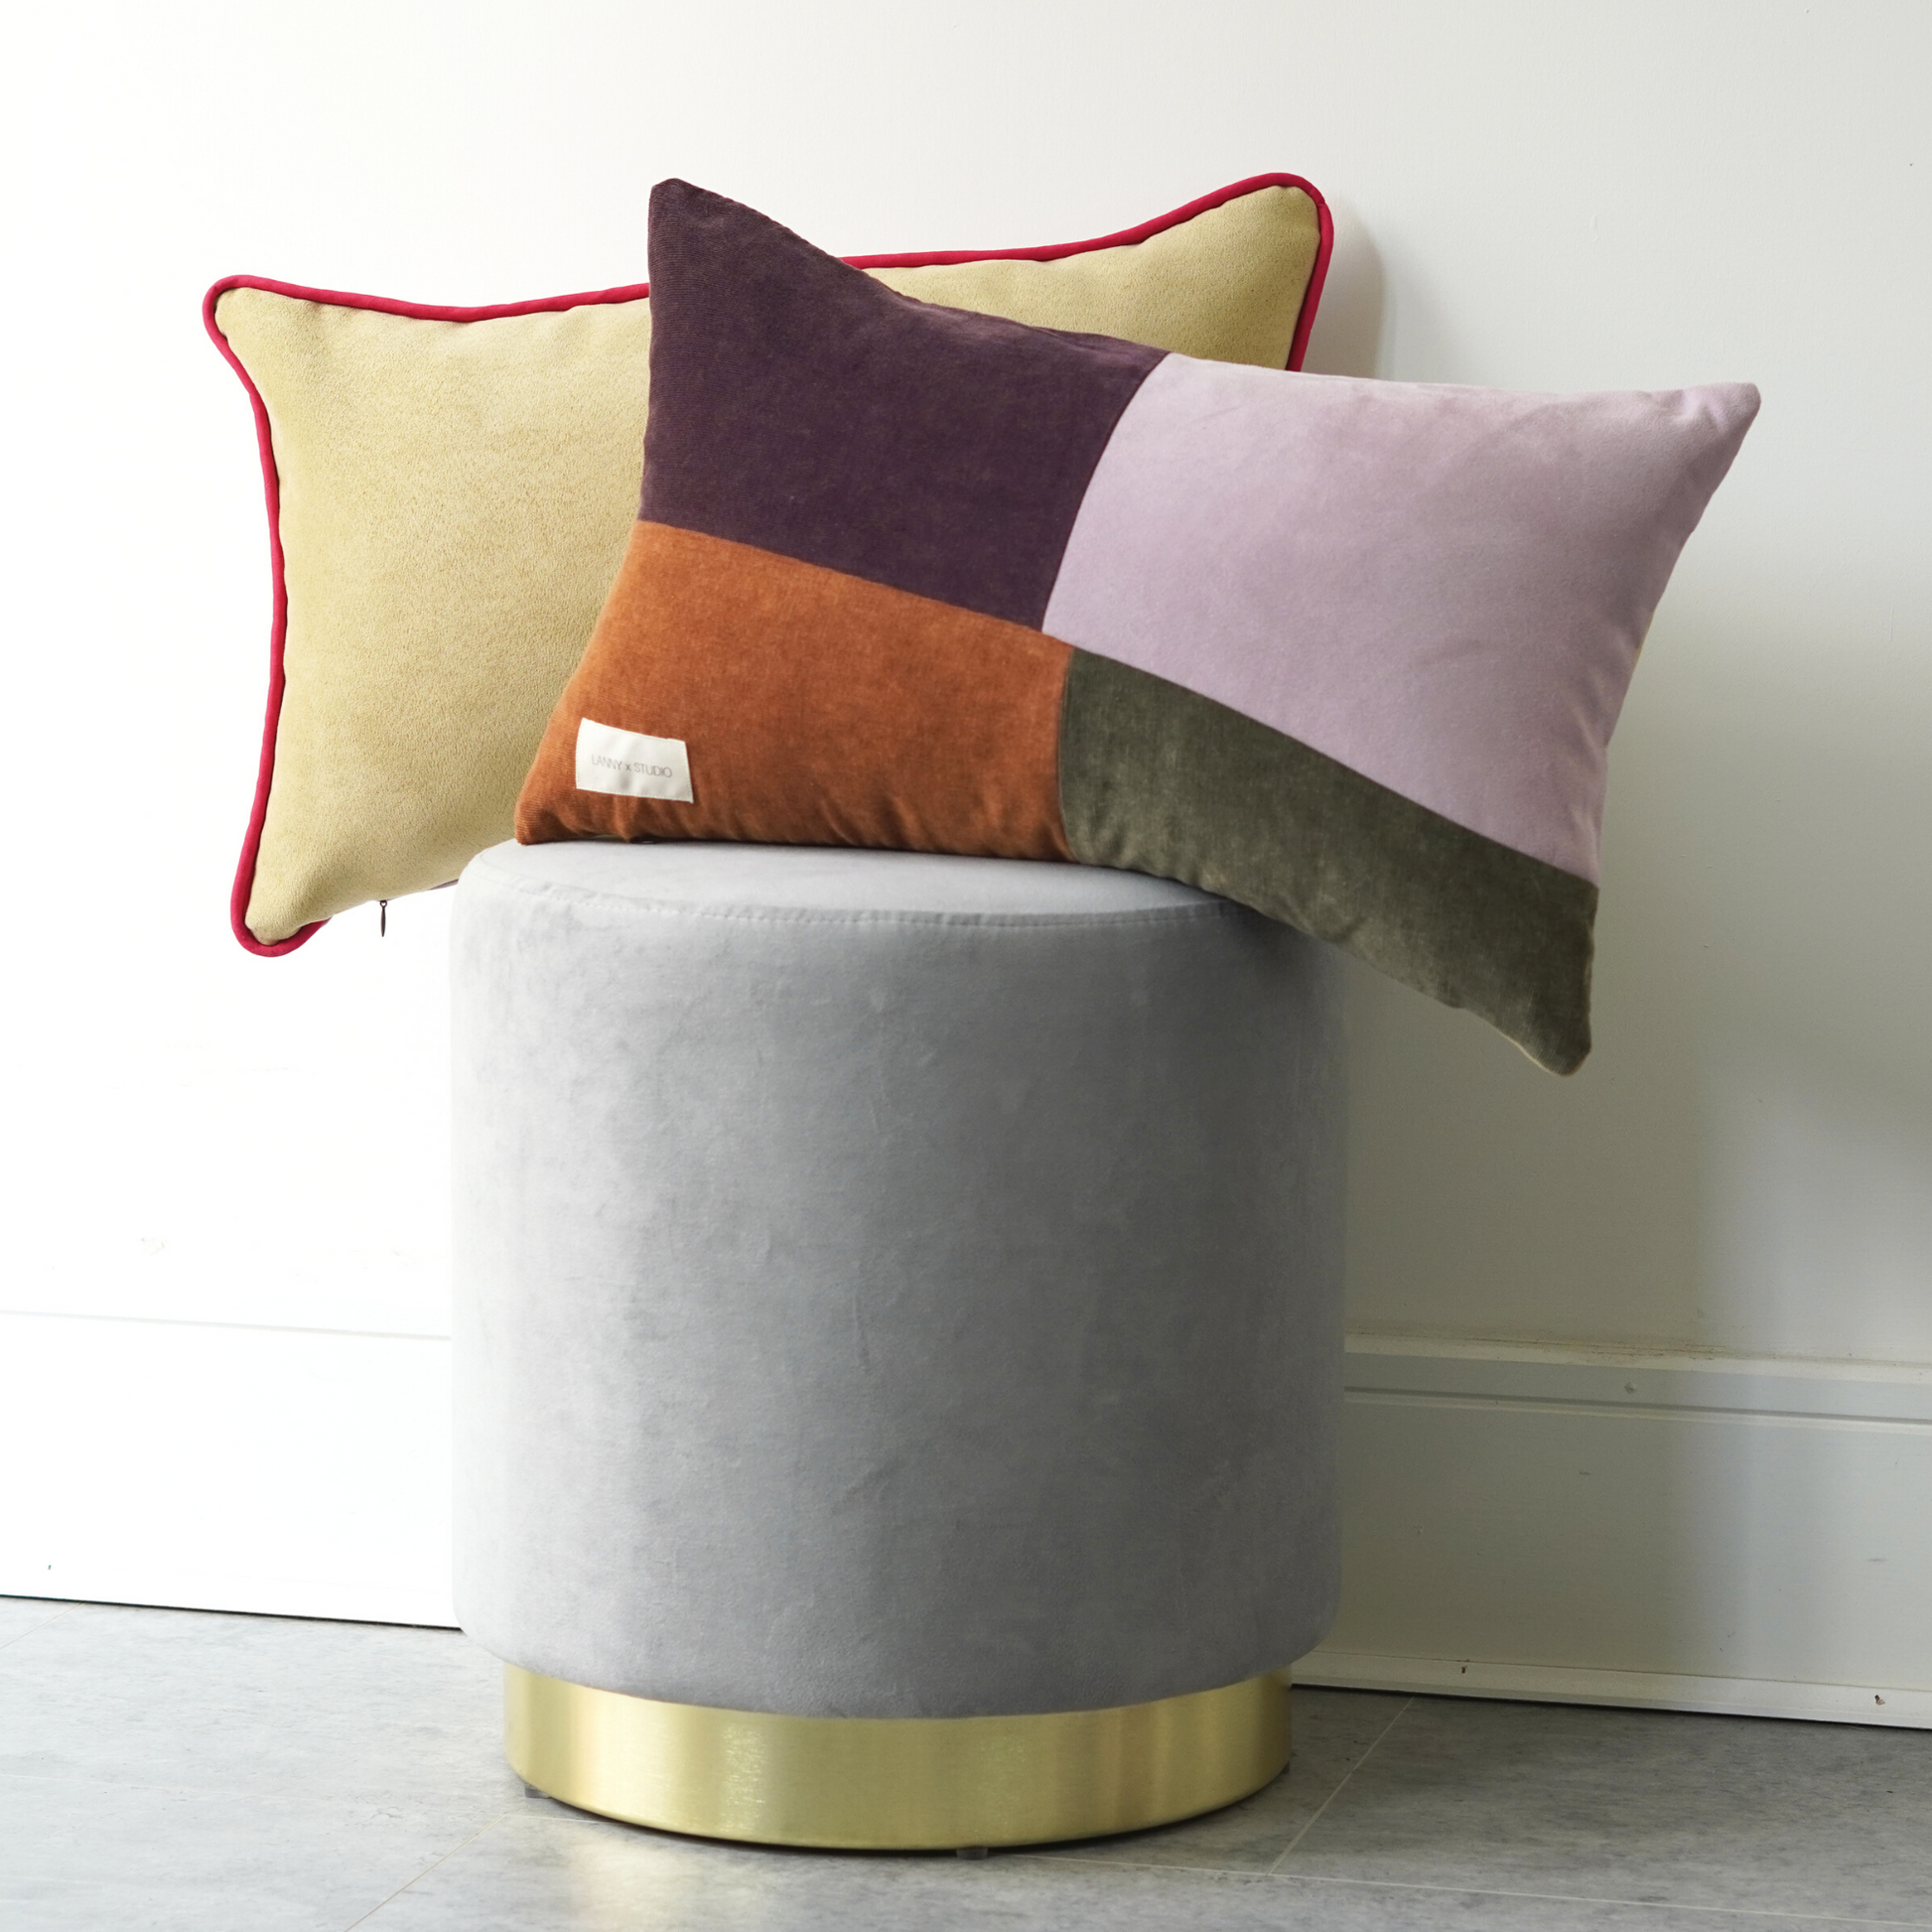 Orange, Purple, Green and Lilac panelled rentable cushion with branded LannyxStudio label partnered with the yellow suede look rectangle cushion with contrast Fuchsia piping. 